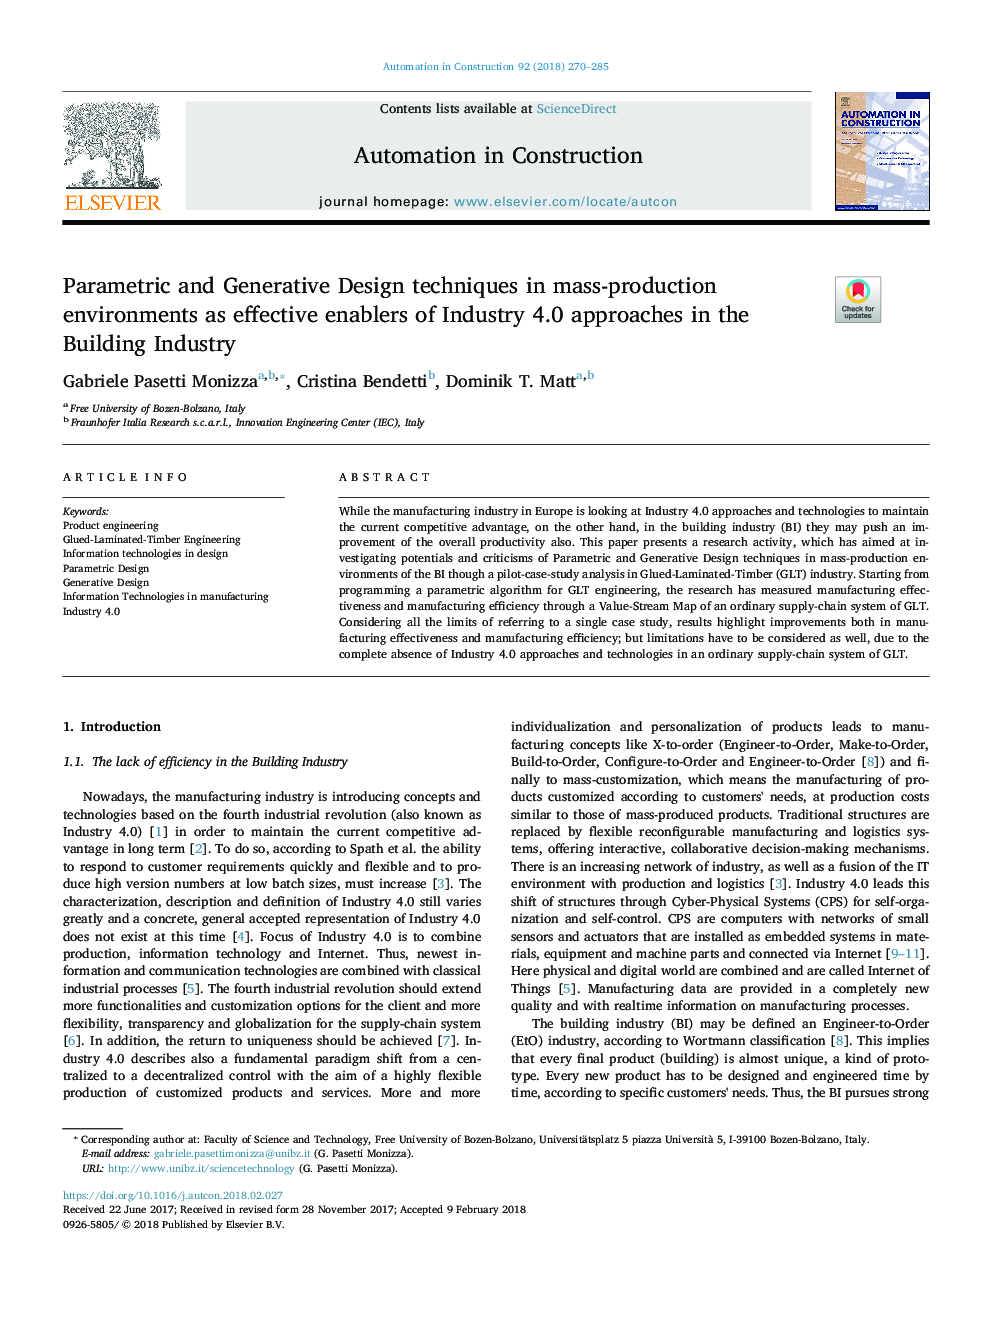 Parametric and Generative Design techniques in mass-production environments as effective enablers of Industry 4.0 approaches in the Building Industry